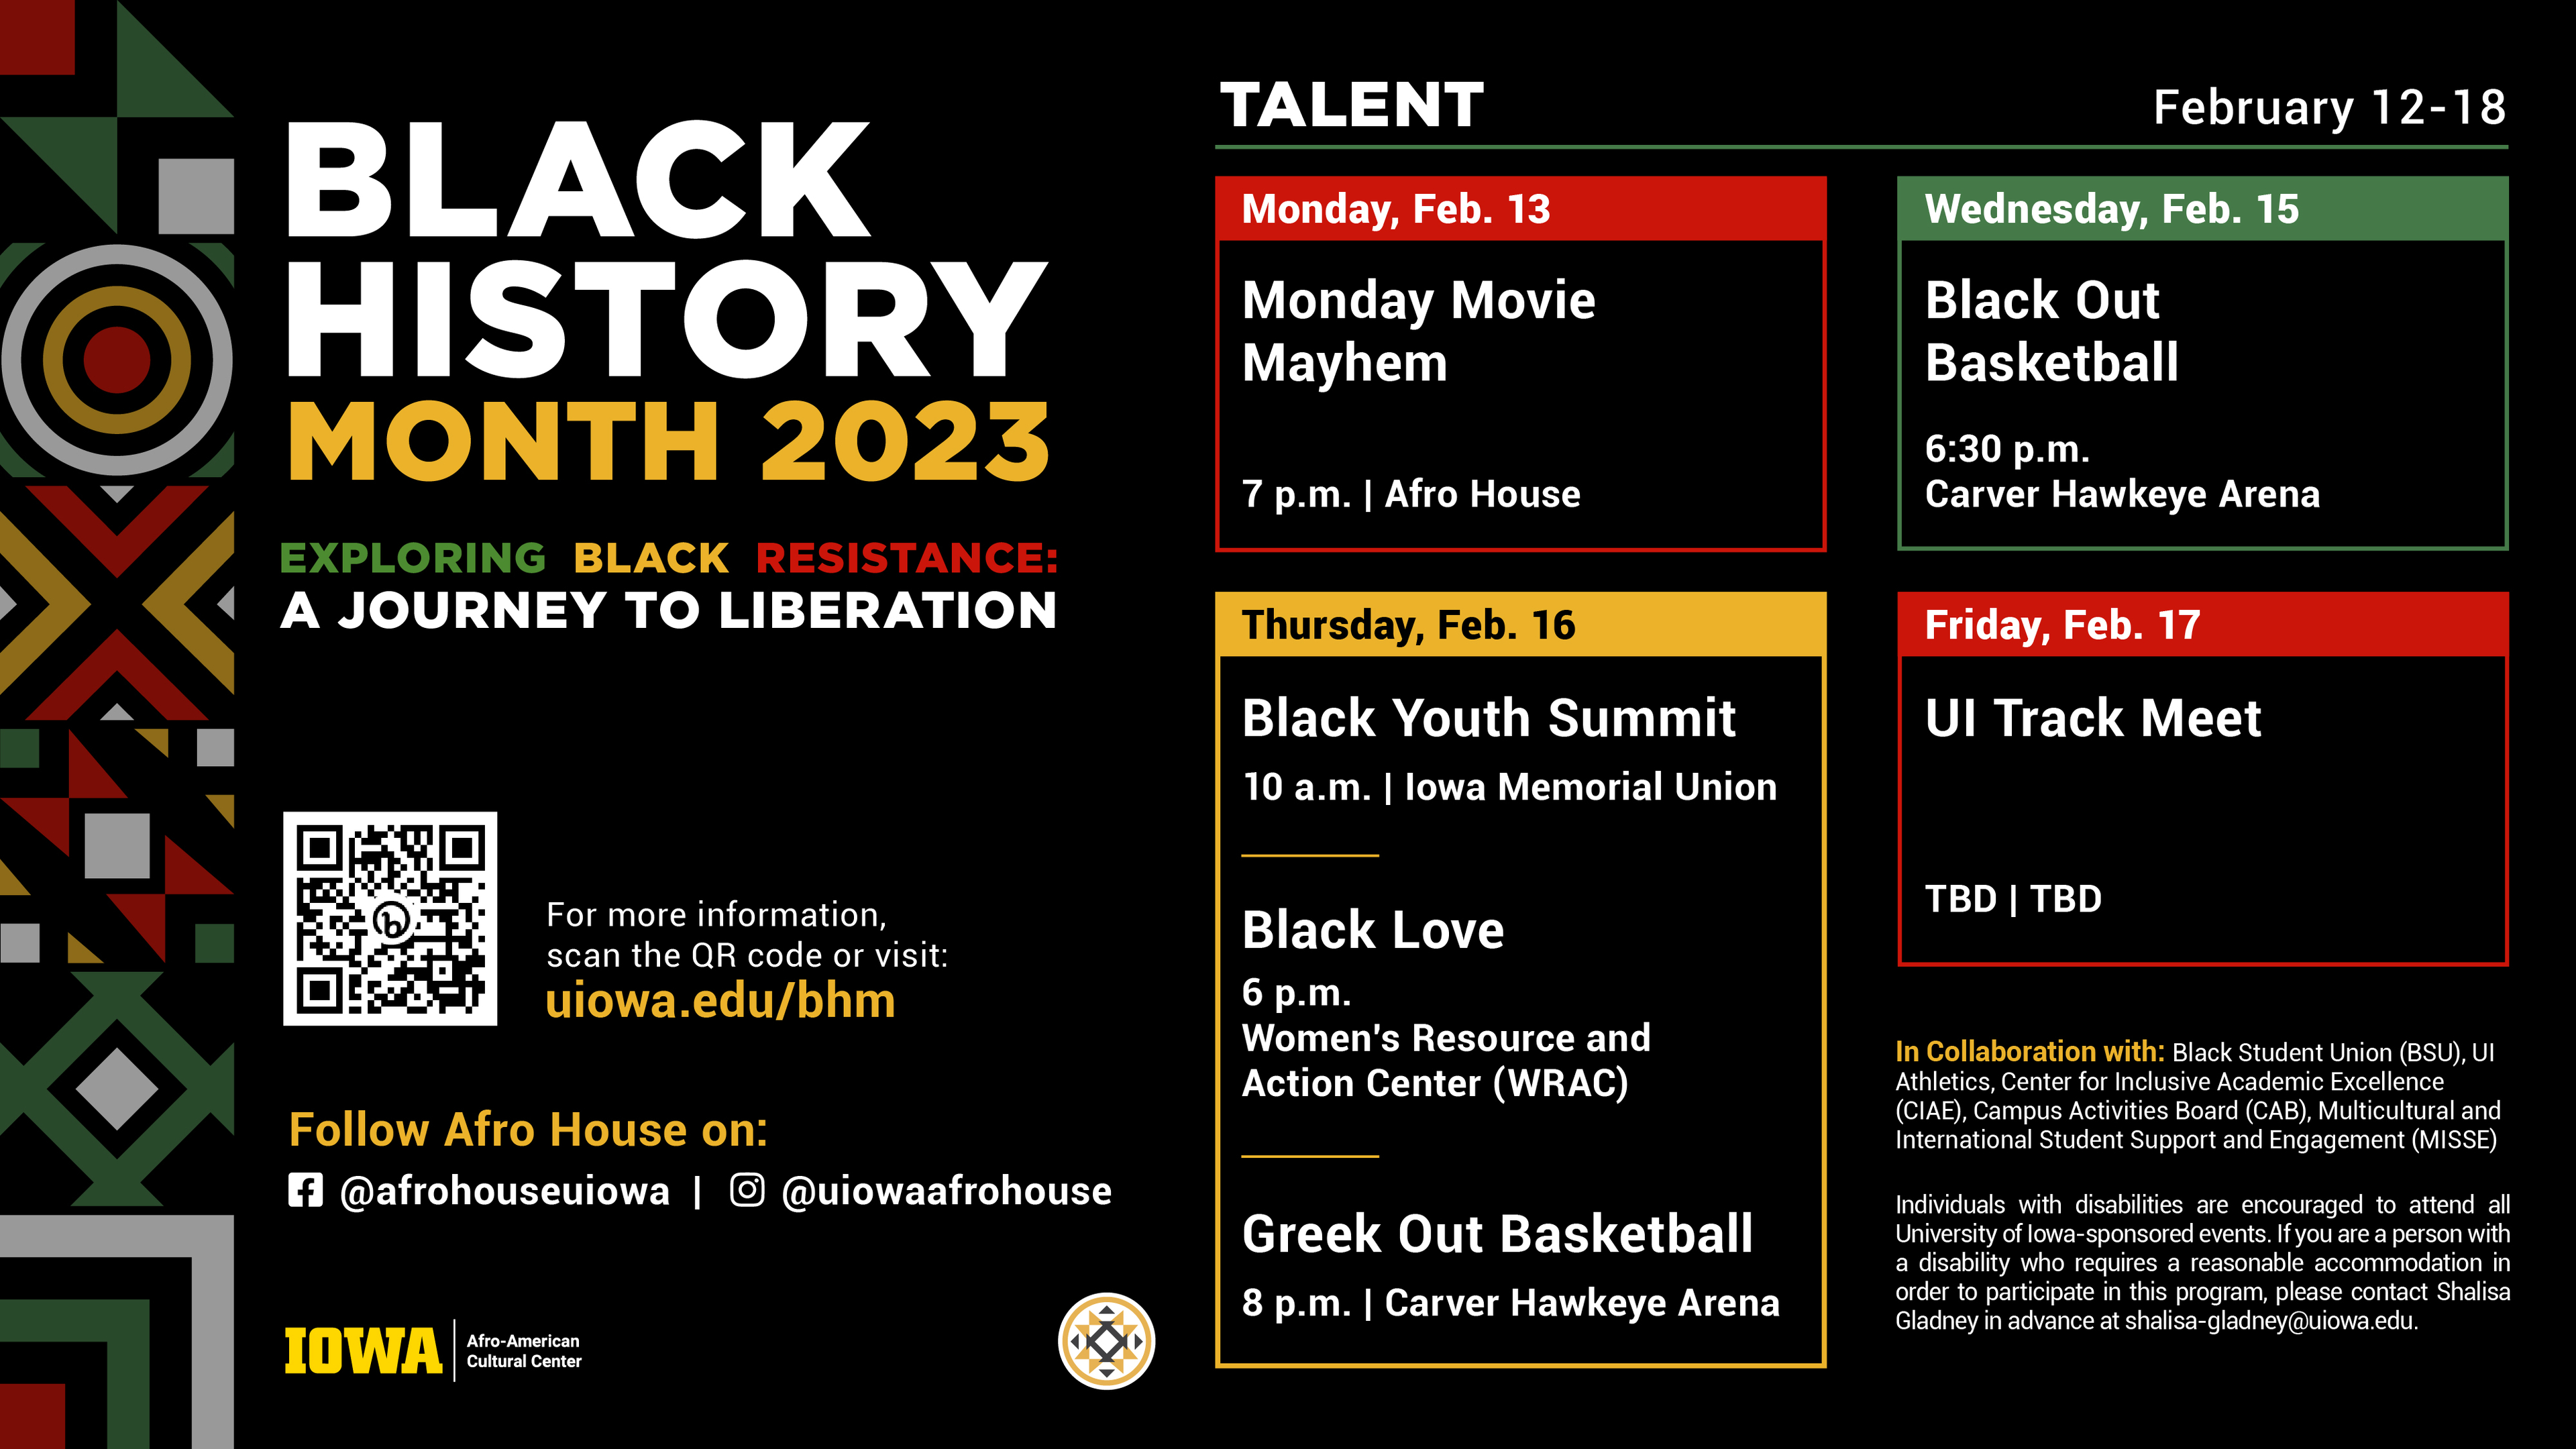 Black History Month 2023 Day by Day schedule For more information visit uiowa.edu/bhm